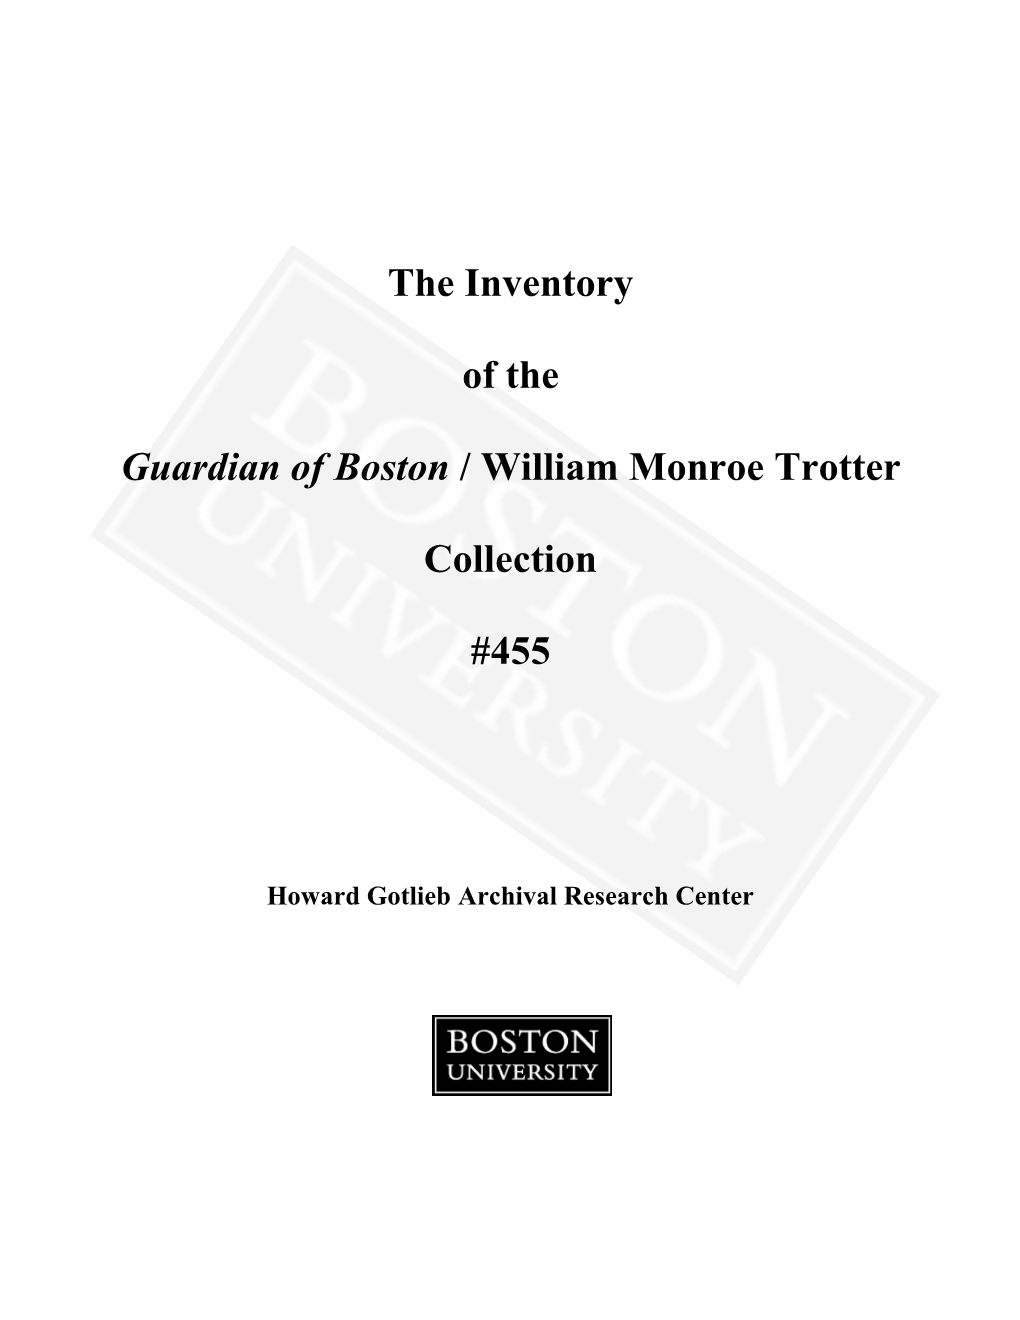 The Inventory of the Guardian of Boston / William Monroe Trotter